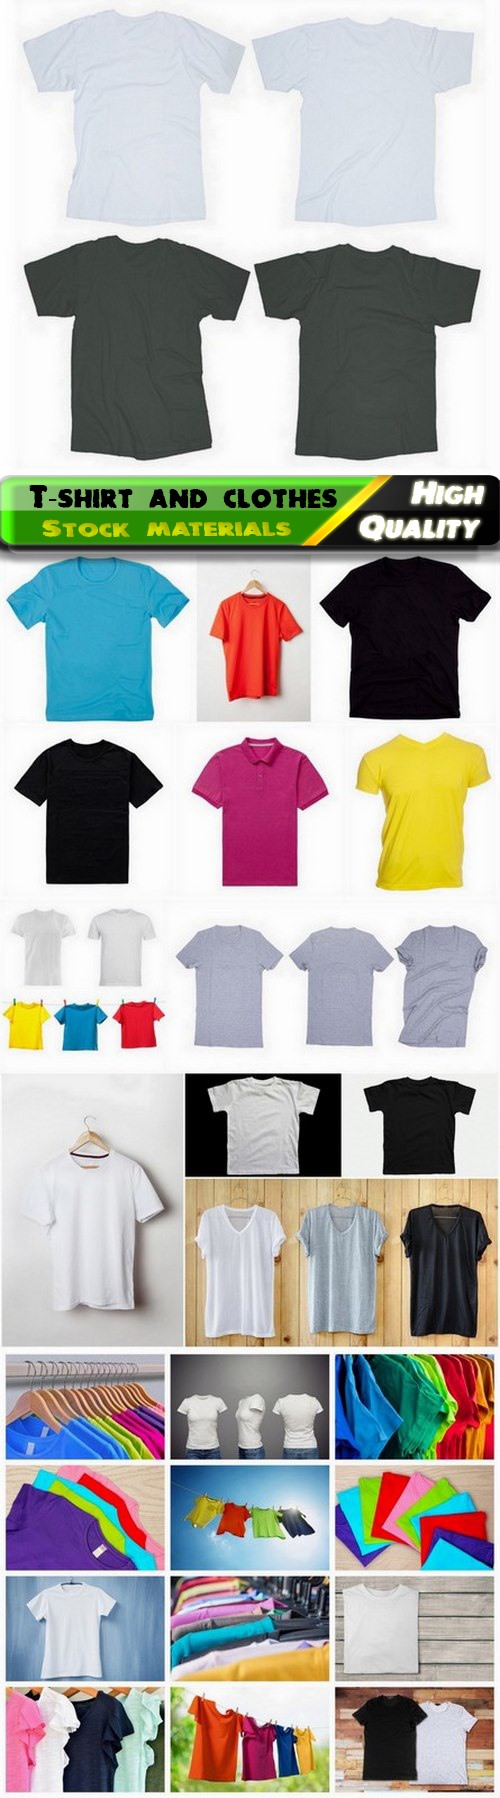 Fashion store with colored clothes and t-shirt 25 HQ Jpg